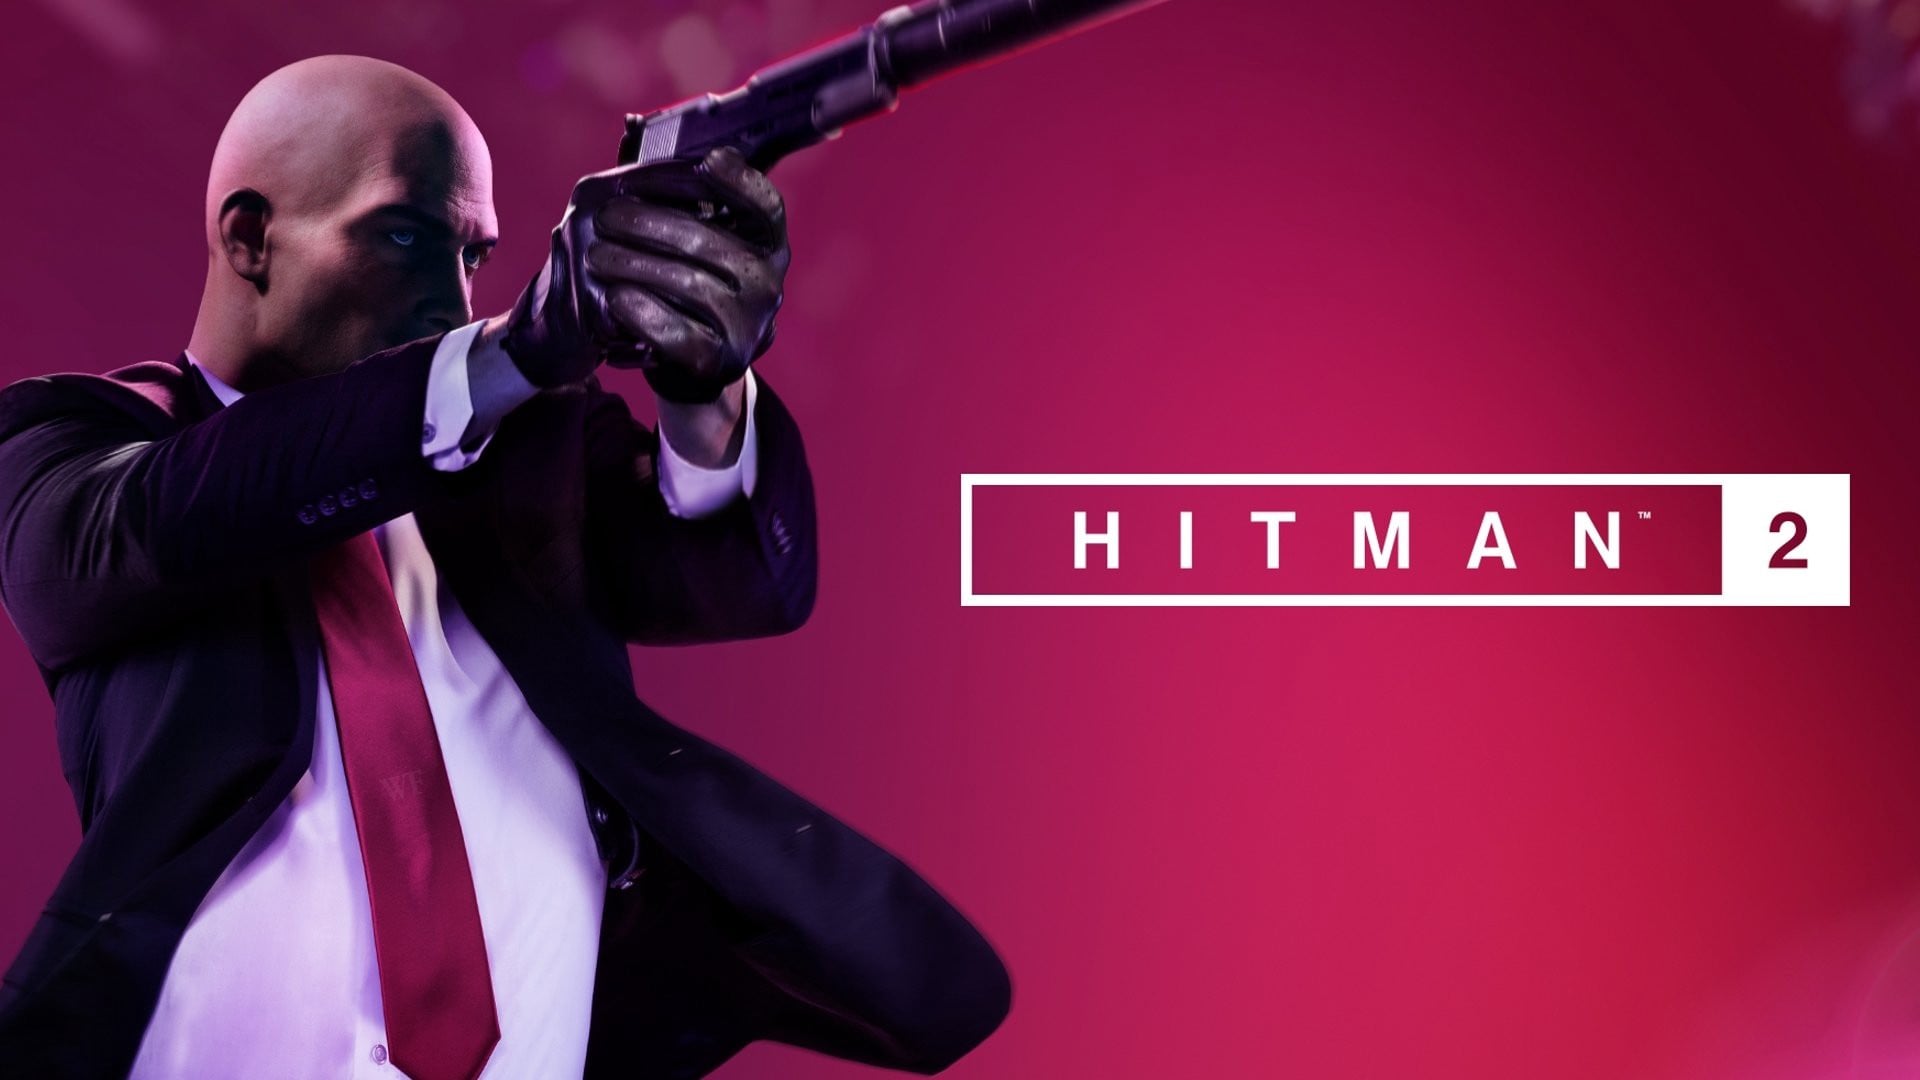 Hitman 2 For PC Game Full Version Free Download